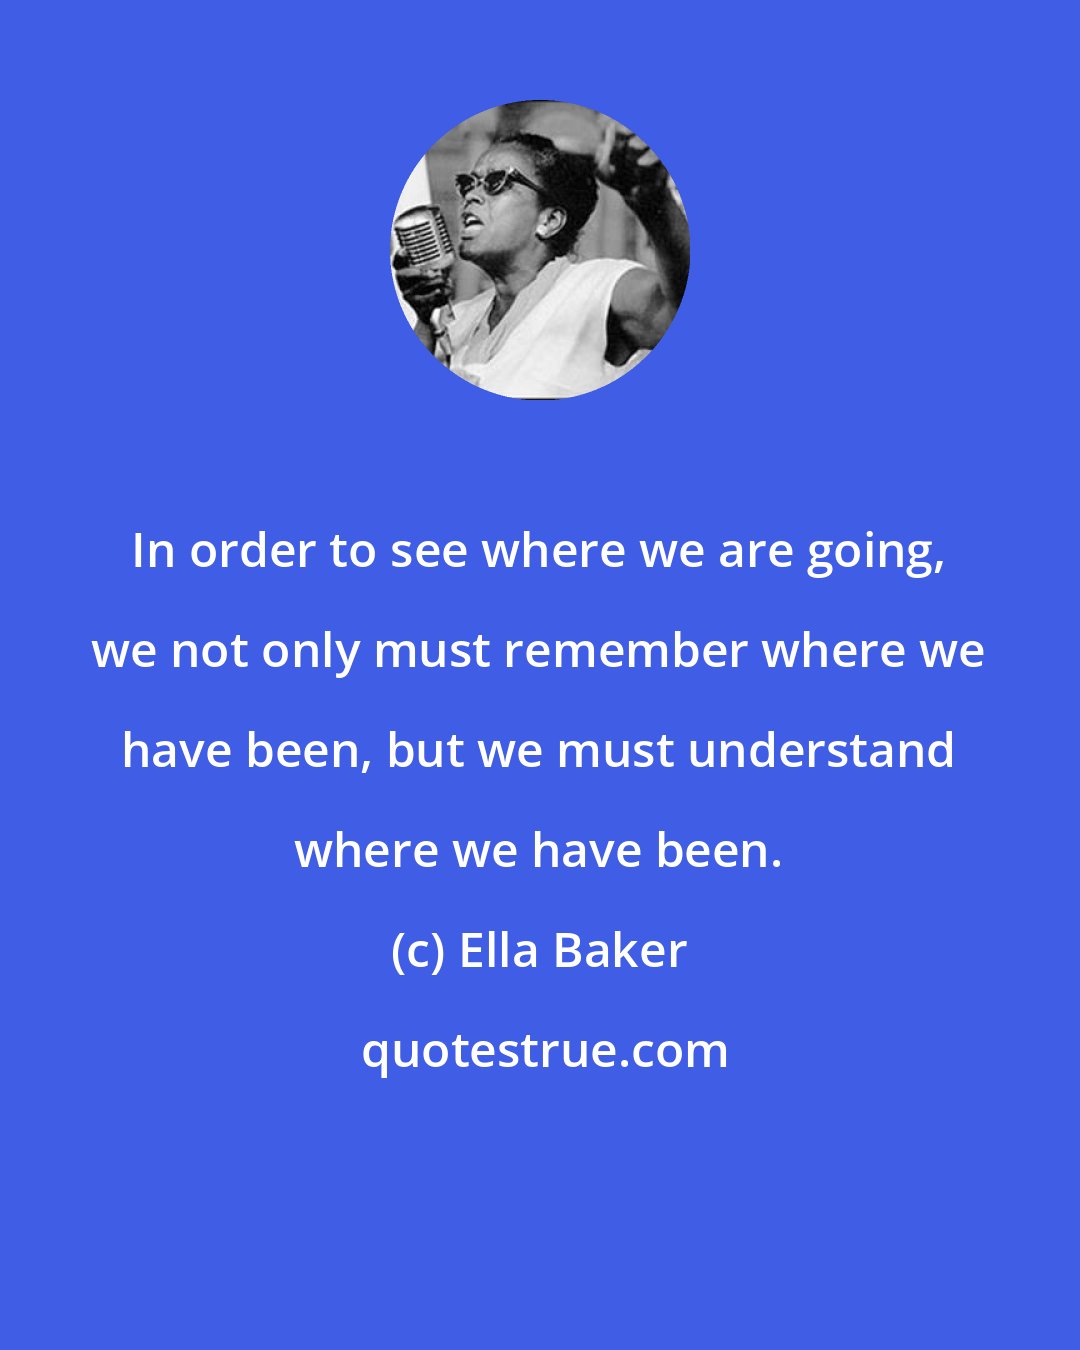 Ella Baker: In order to see where we are going, we not only must remember where we have been, but we must understand where we have been.